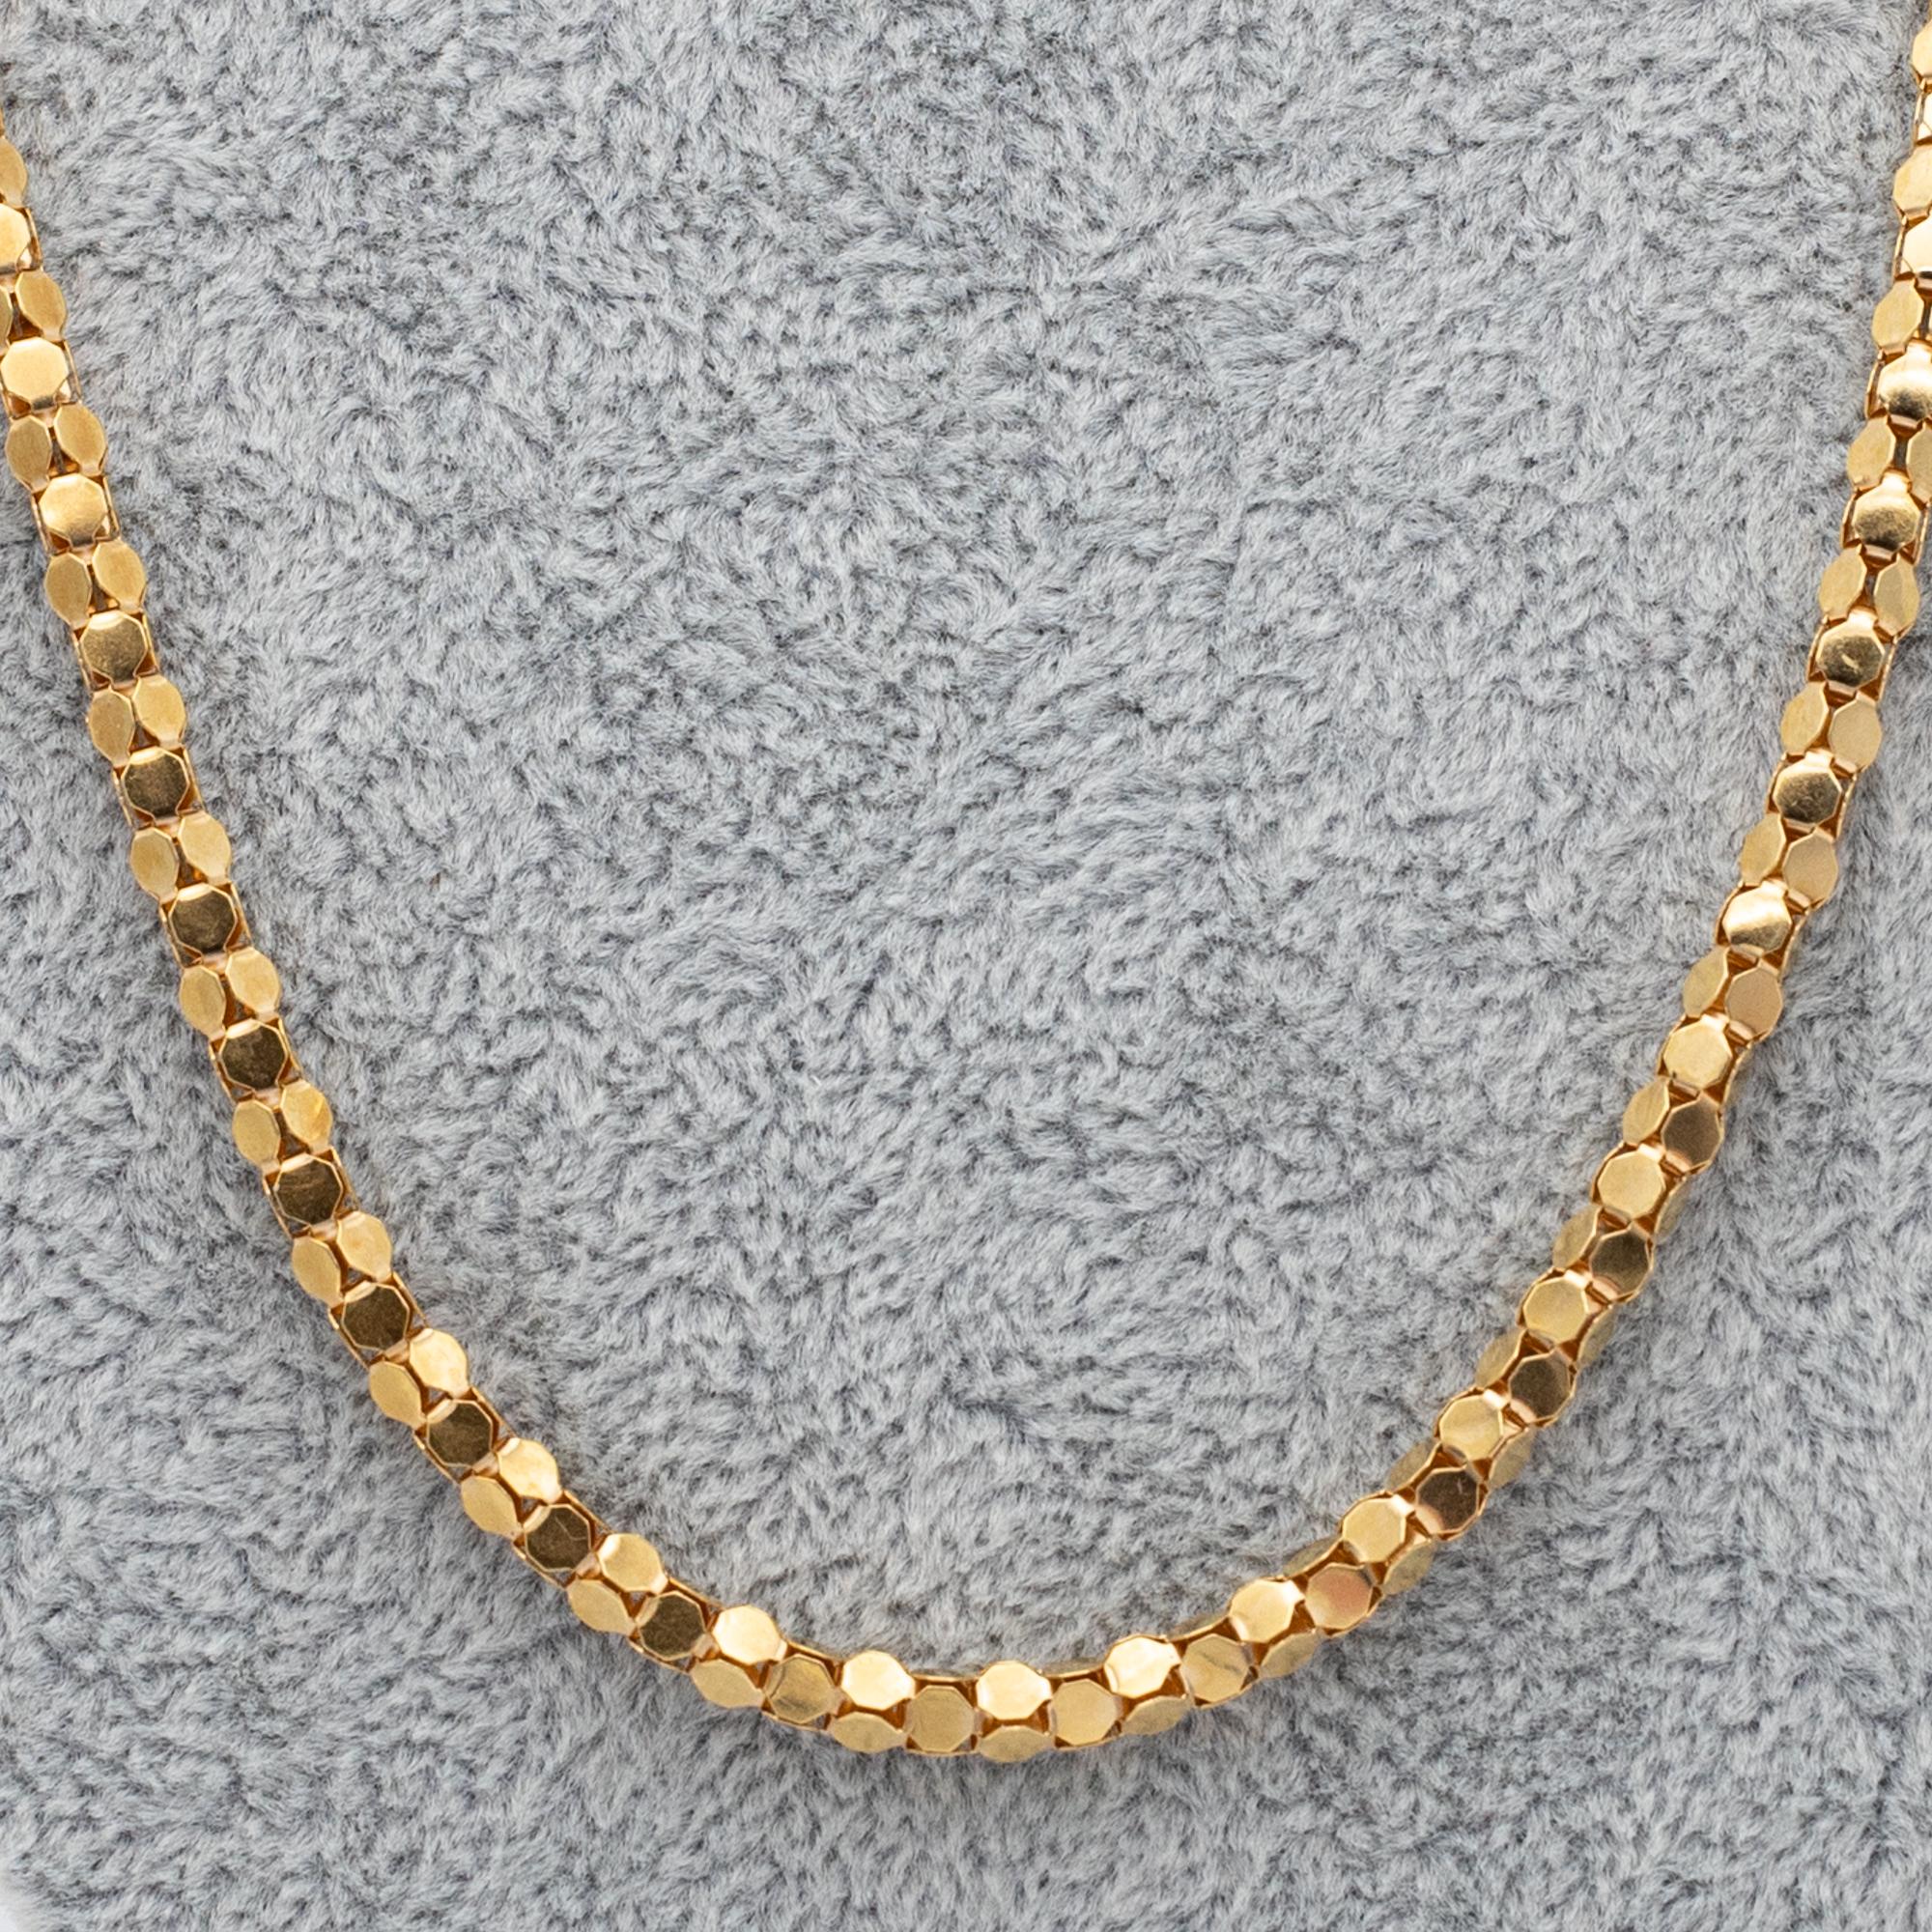 18k solid gold Retro popcorn chain - Italian 1960's necklace - 63.5 cm - 25 inch In Good Condition For Sale In Antwerp, BE